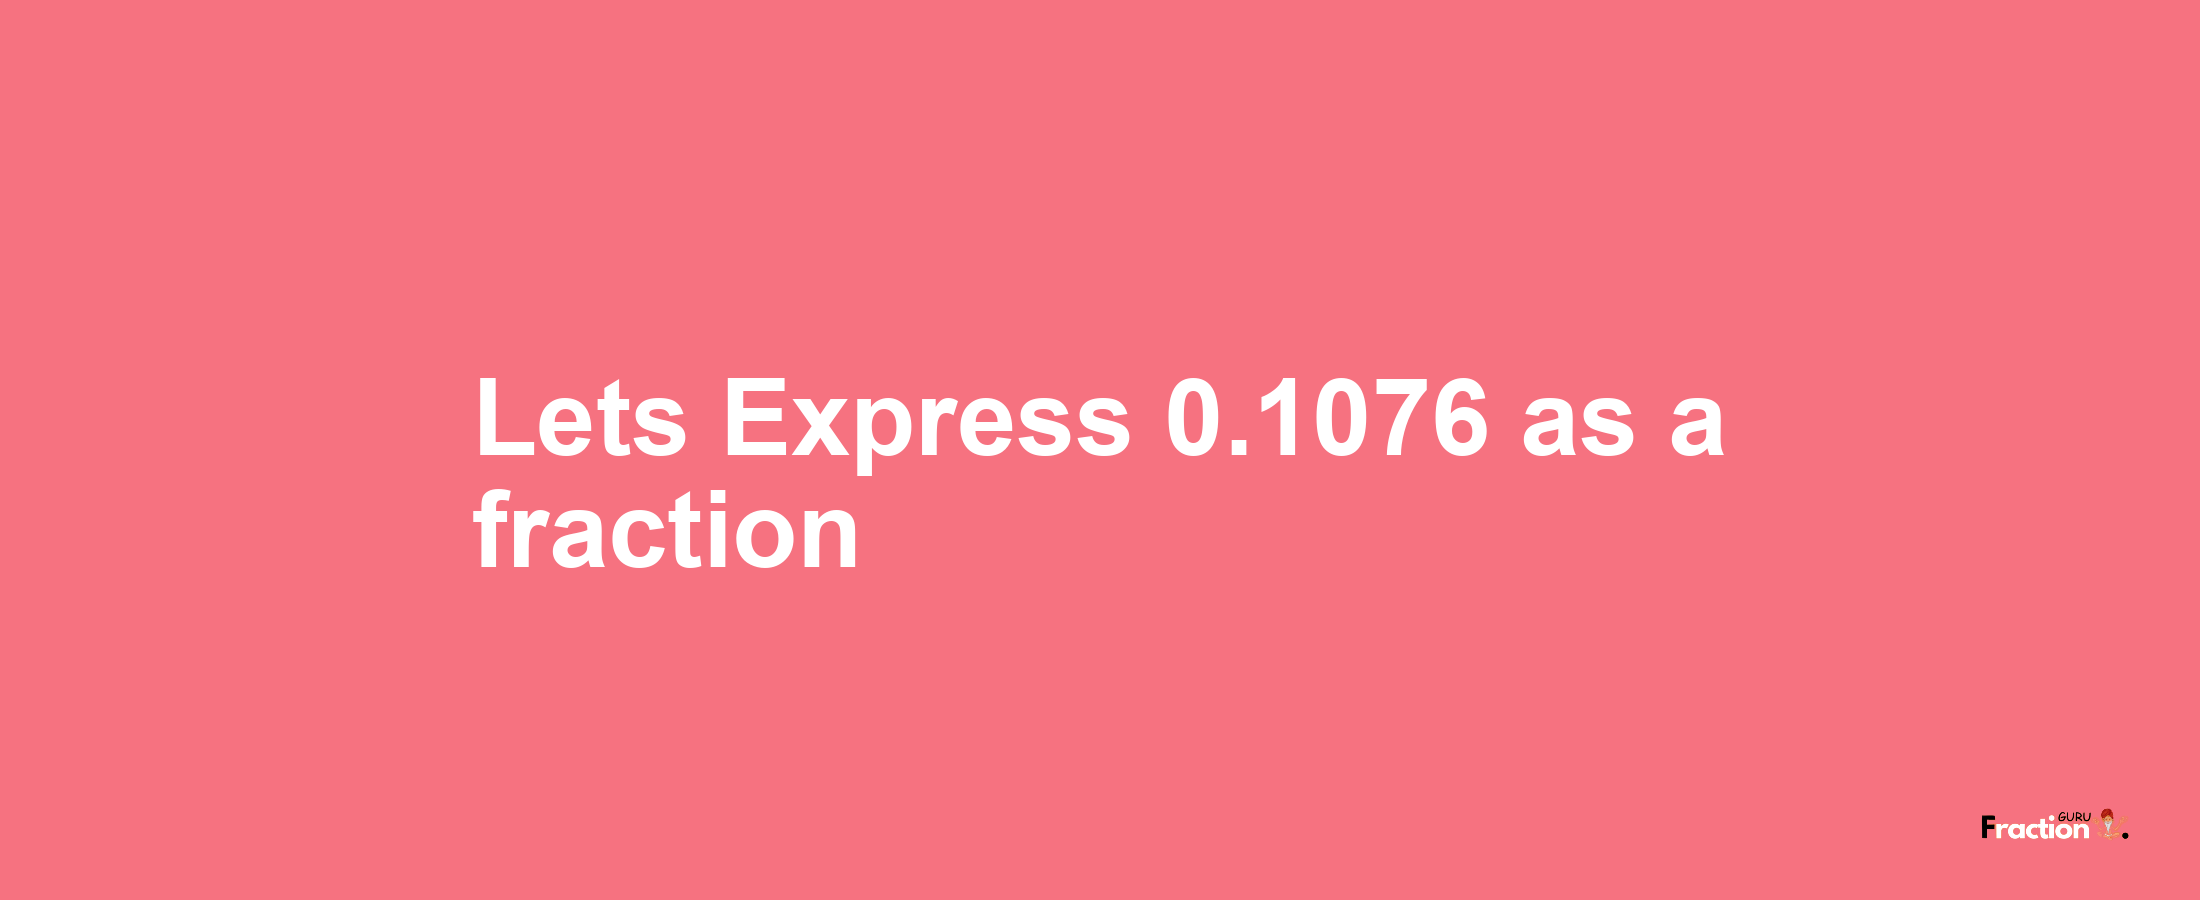 Lets Express 0.1076 as afraction